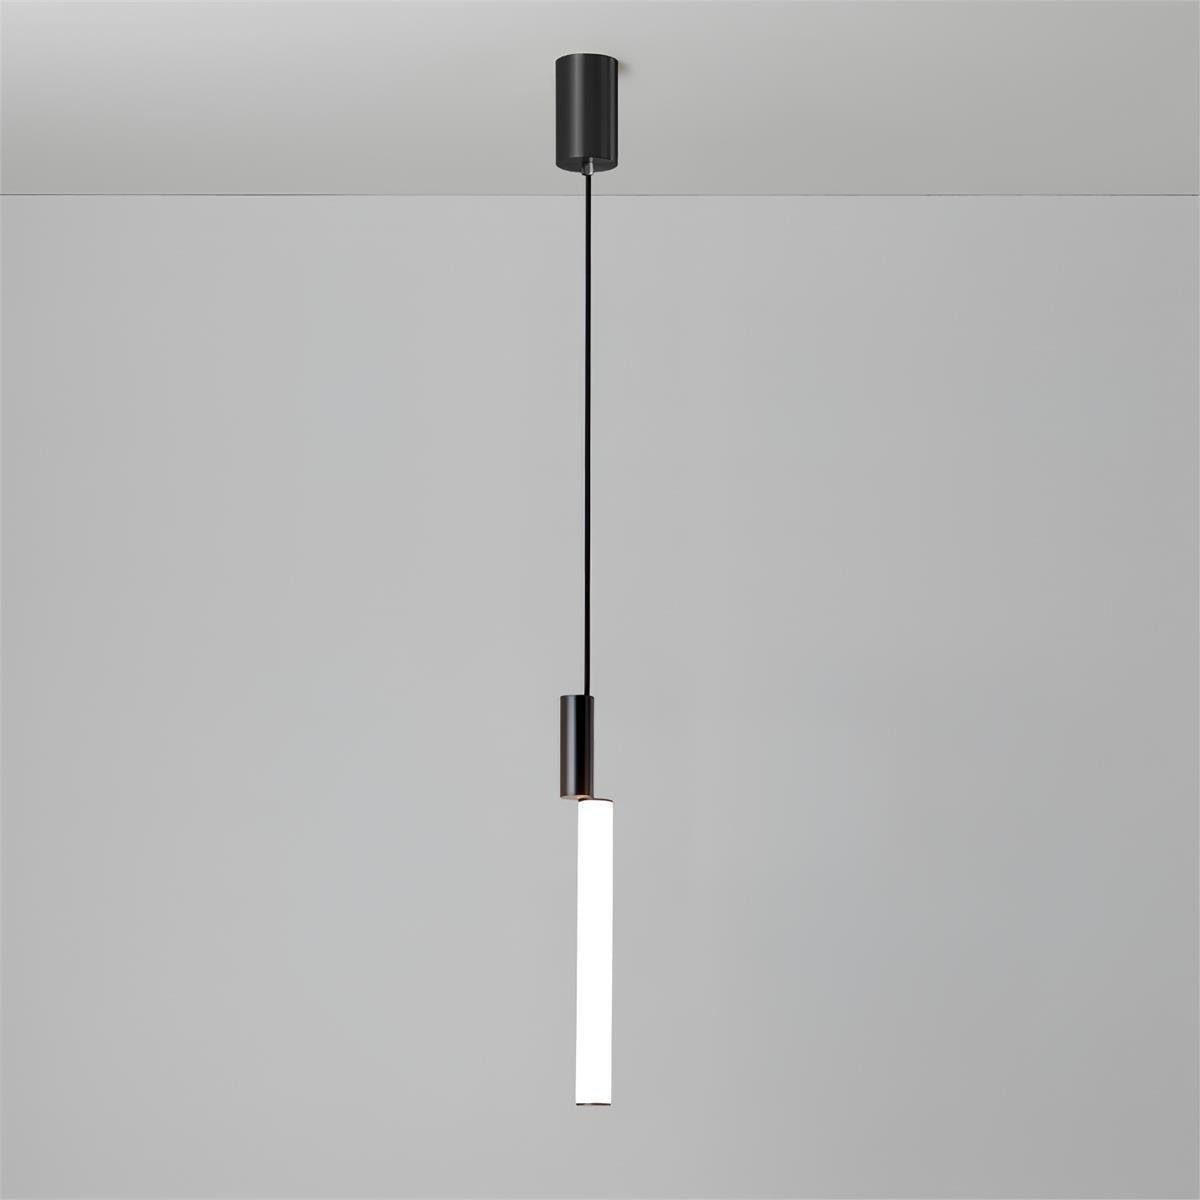 Black and White Cool Light Signal LED Pendant Light, 1 Head, Diameter 2 inches x Height 21.7 inches (5cm x 55cm)